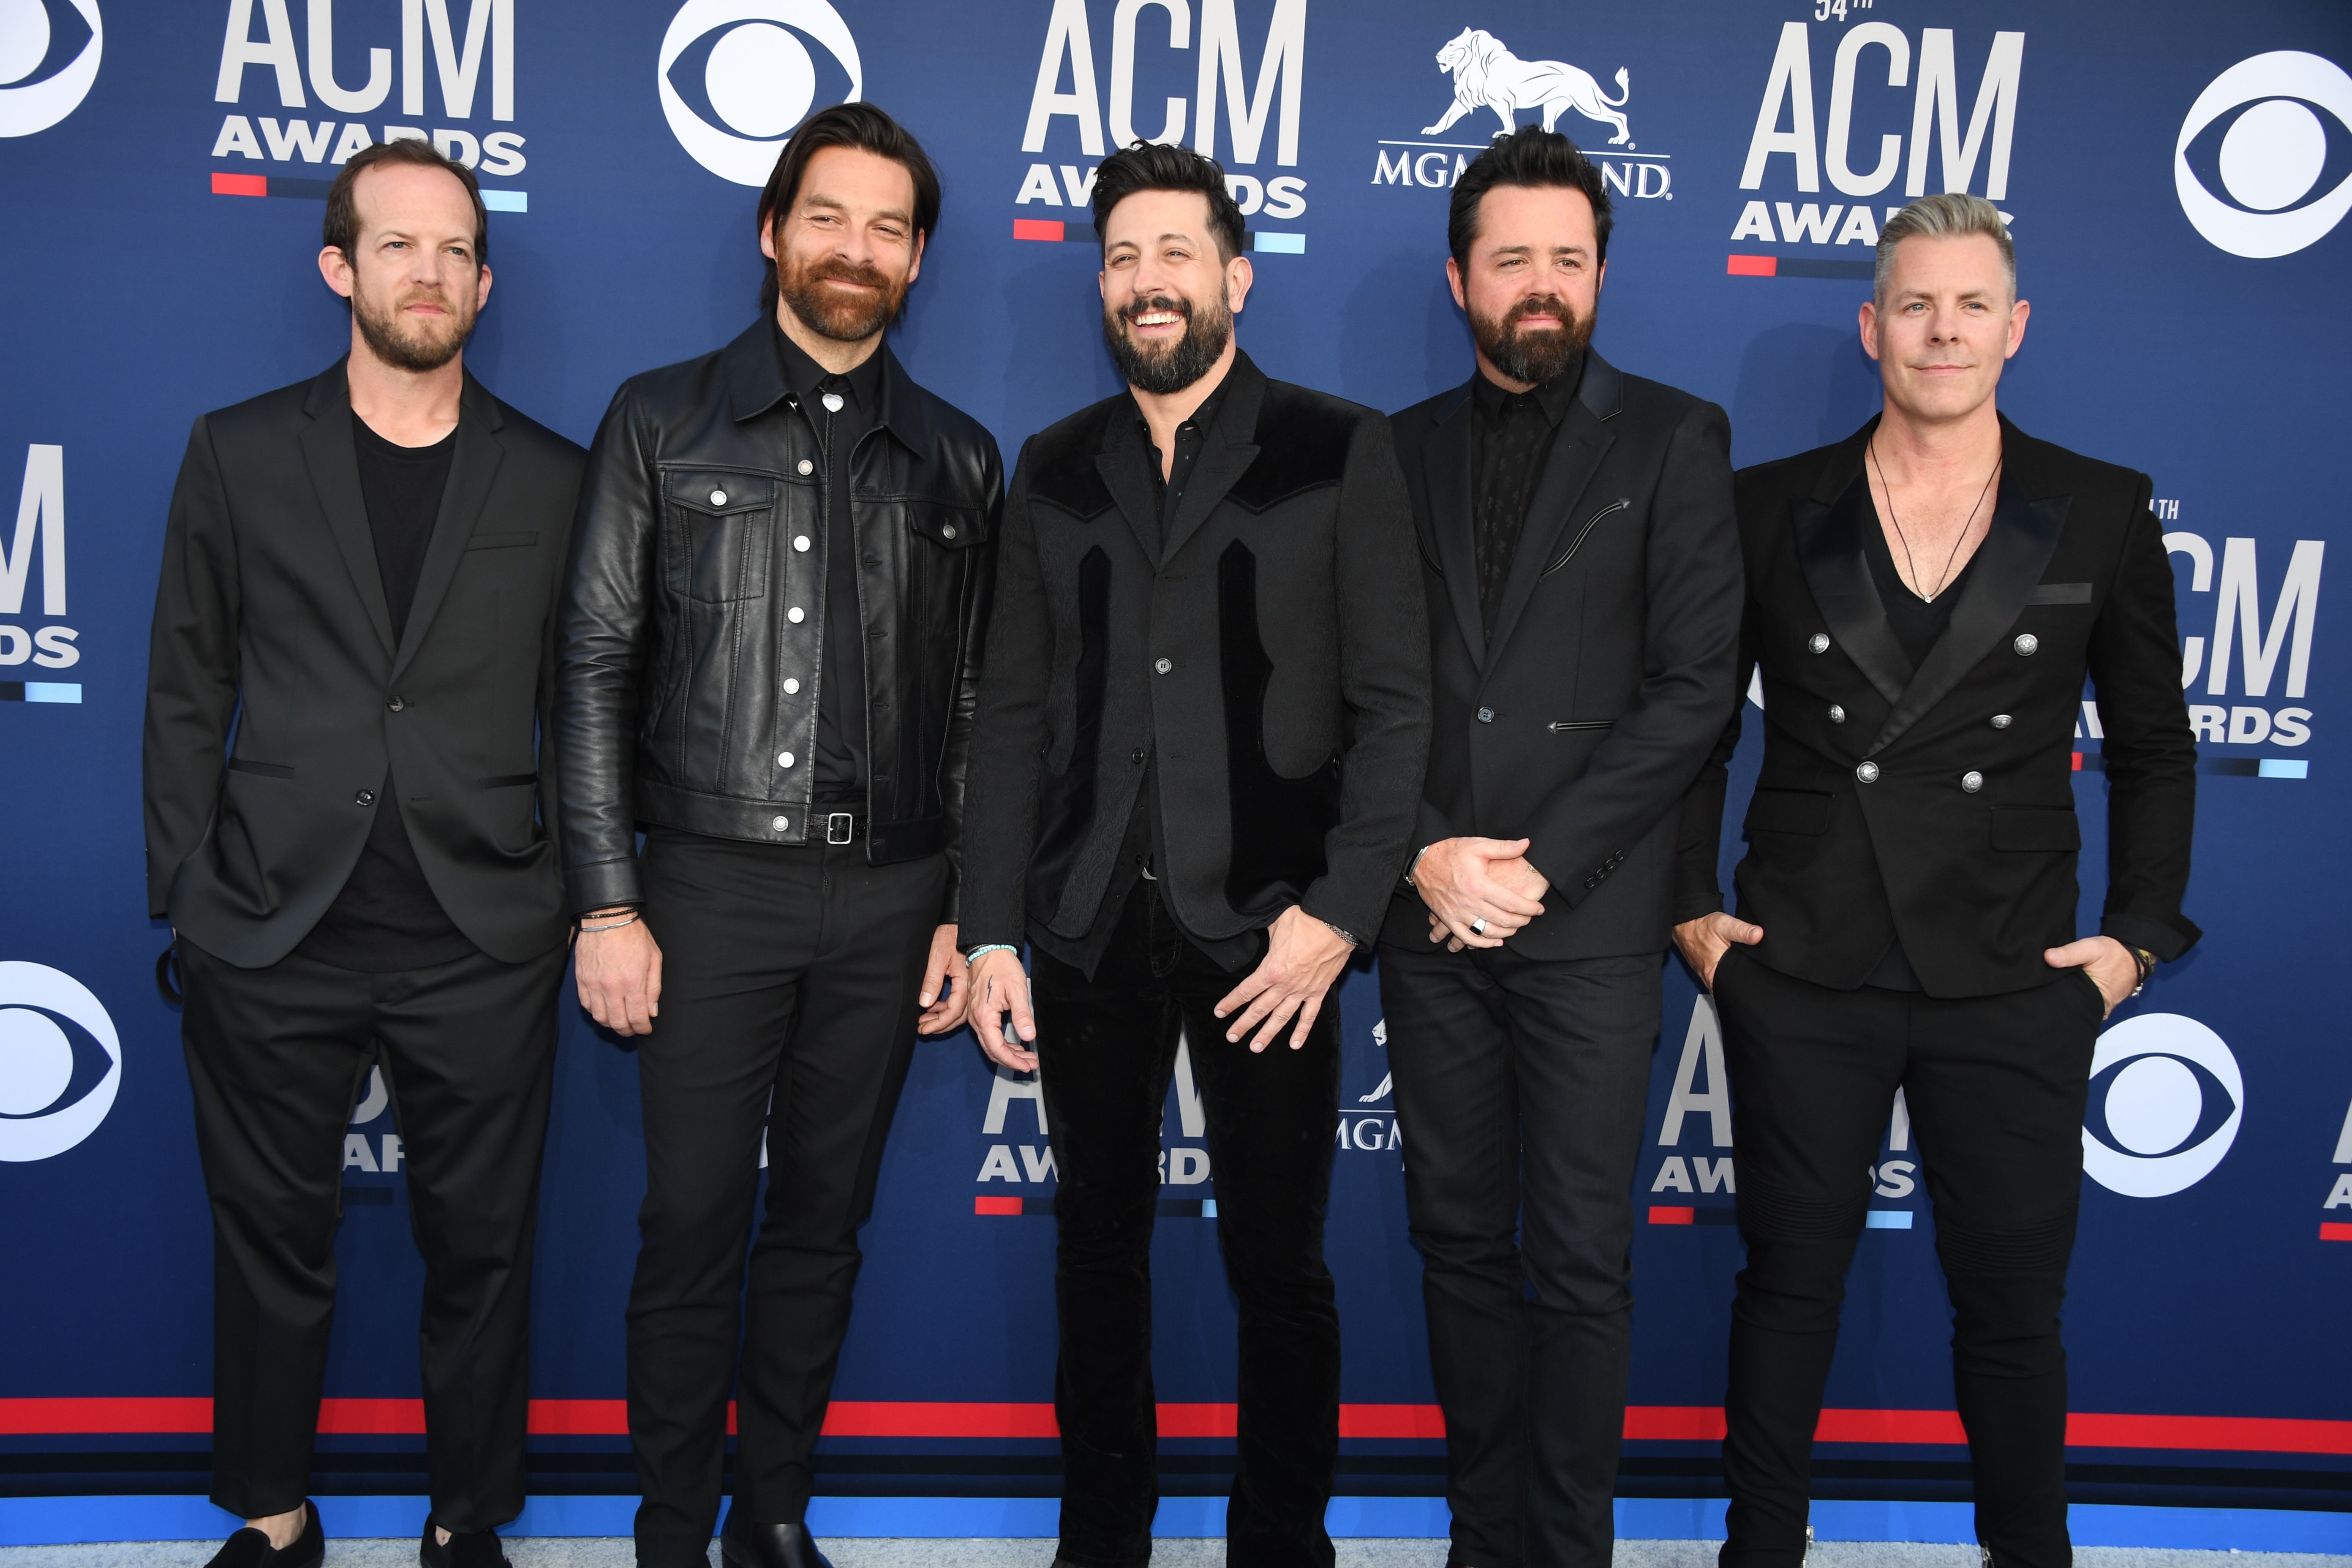 ACM Awards Old Dominion arrives for the 54th Academy of Country Music Awards on April 7, 2019 in Las Vegas, Nevada. (Photo by Robyn Beck / AFP) (Photo credit should read ROBYN BECK/AFP/Getty Images)